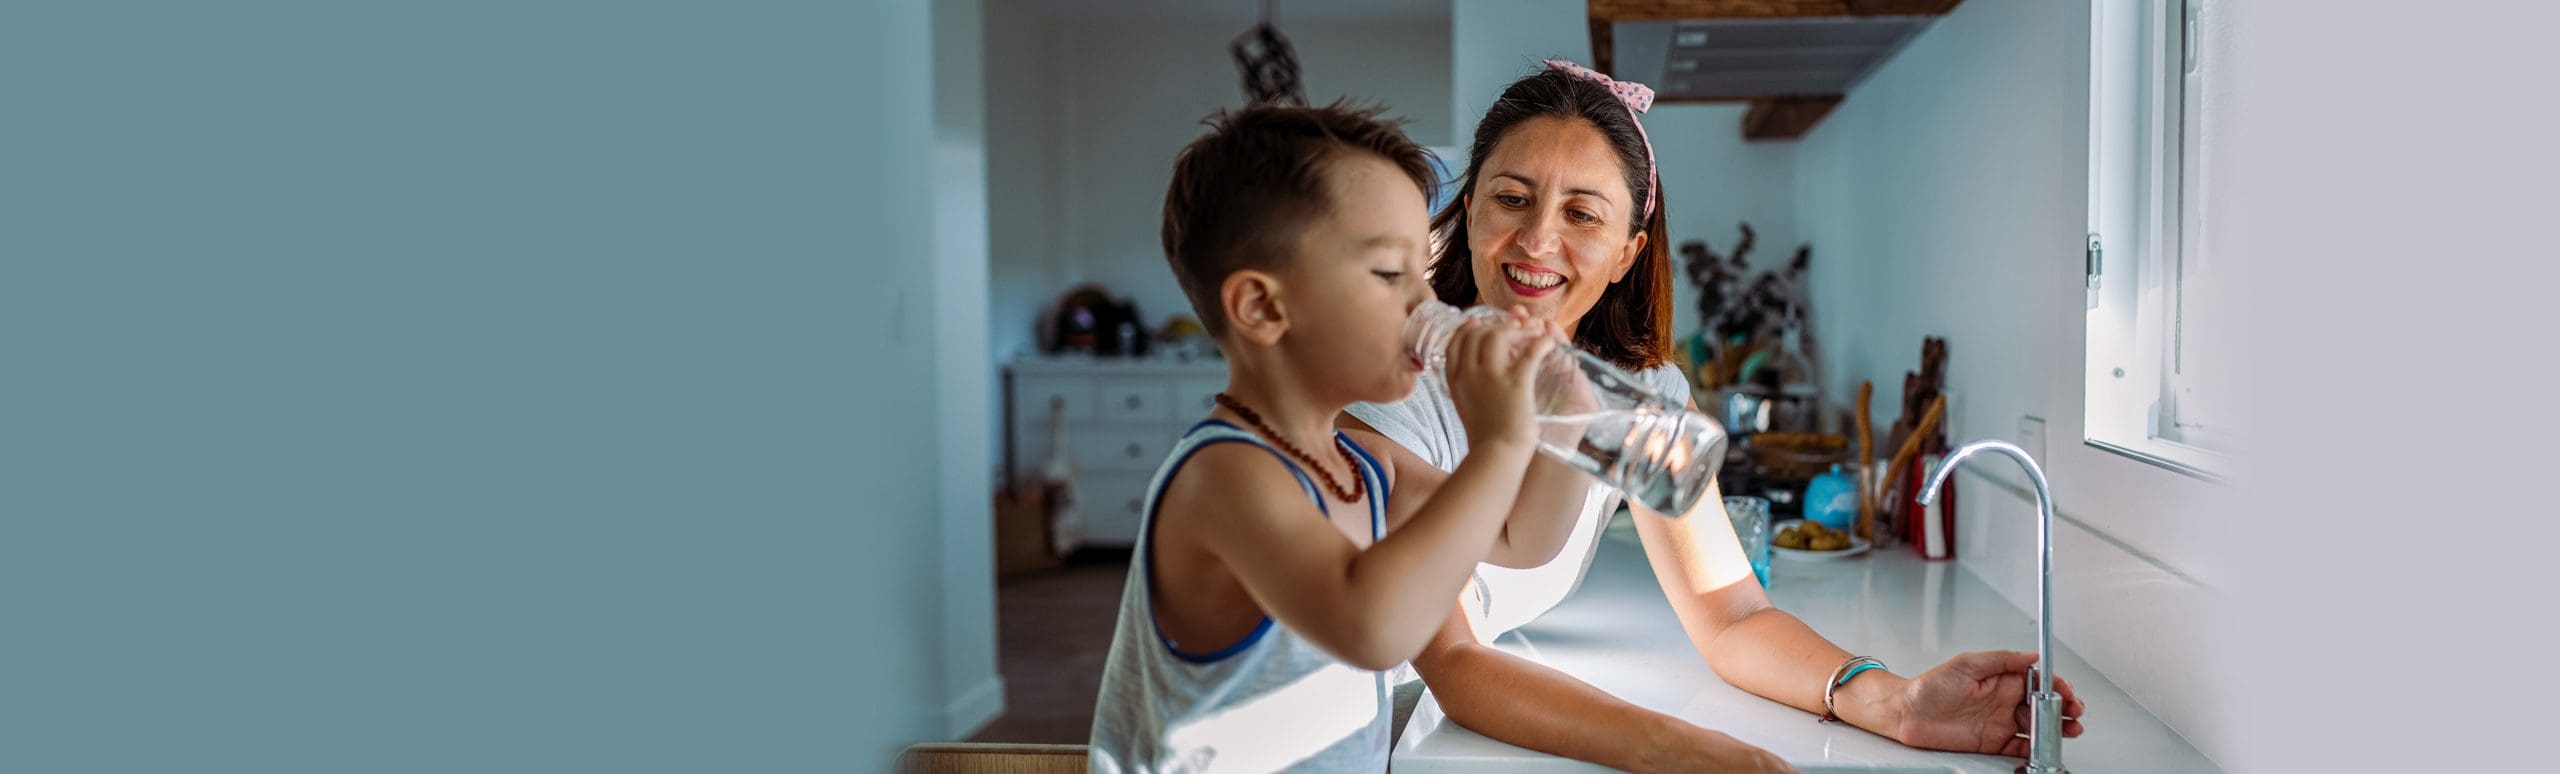 Mother and son drinking at home by the kitchen sink drinking water from a bottle